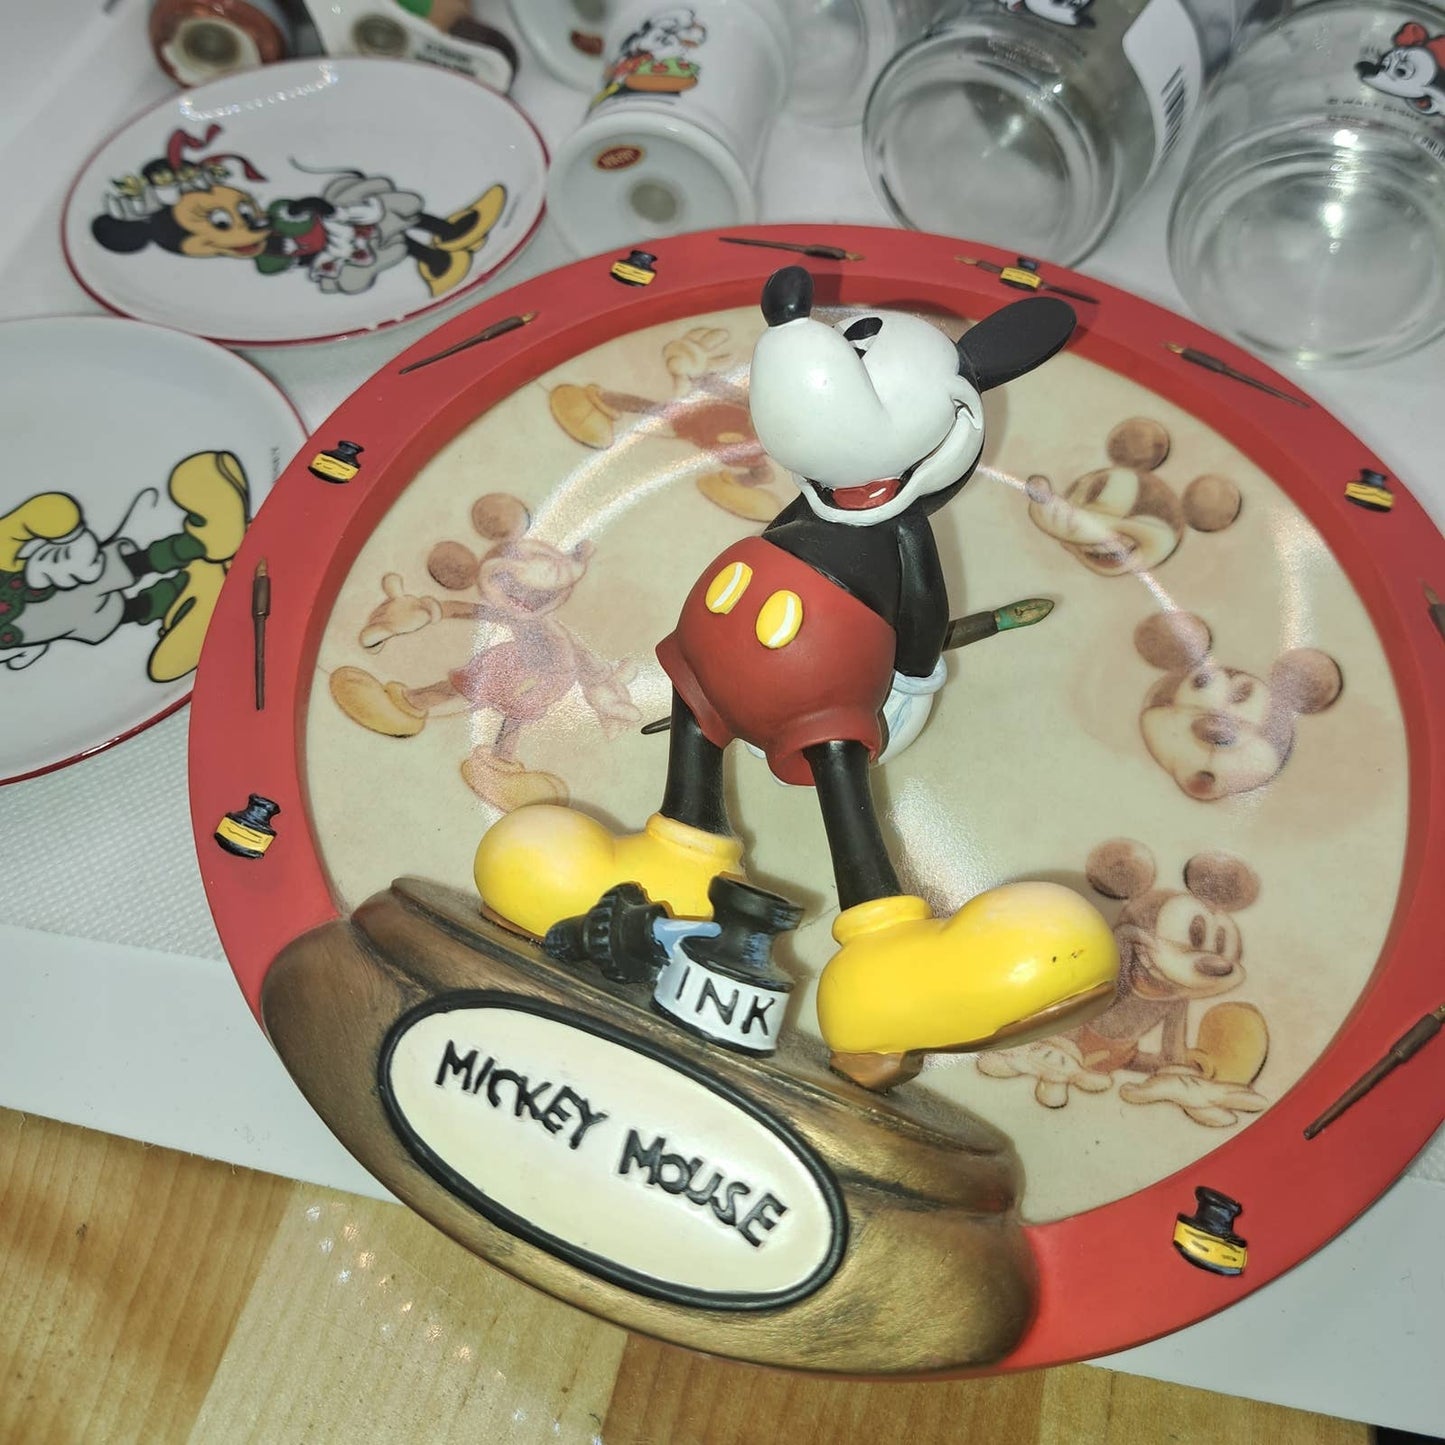 Add Fun to your table! 8 Mickey & Minnie Salt Pepper-Vintage Plates